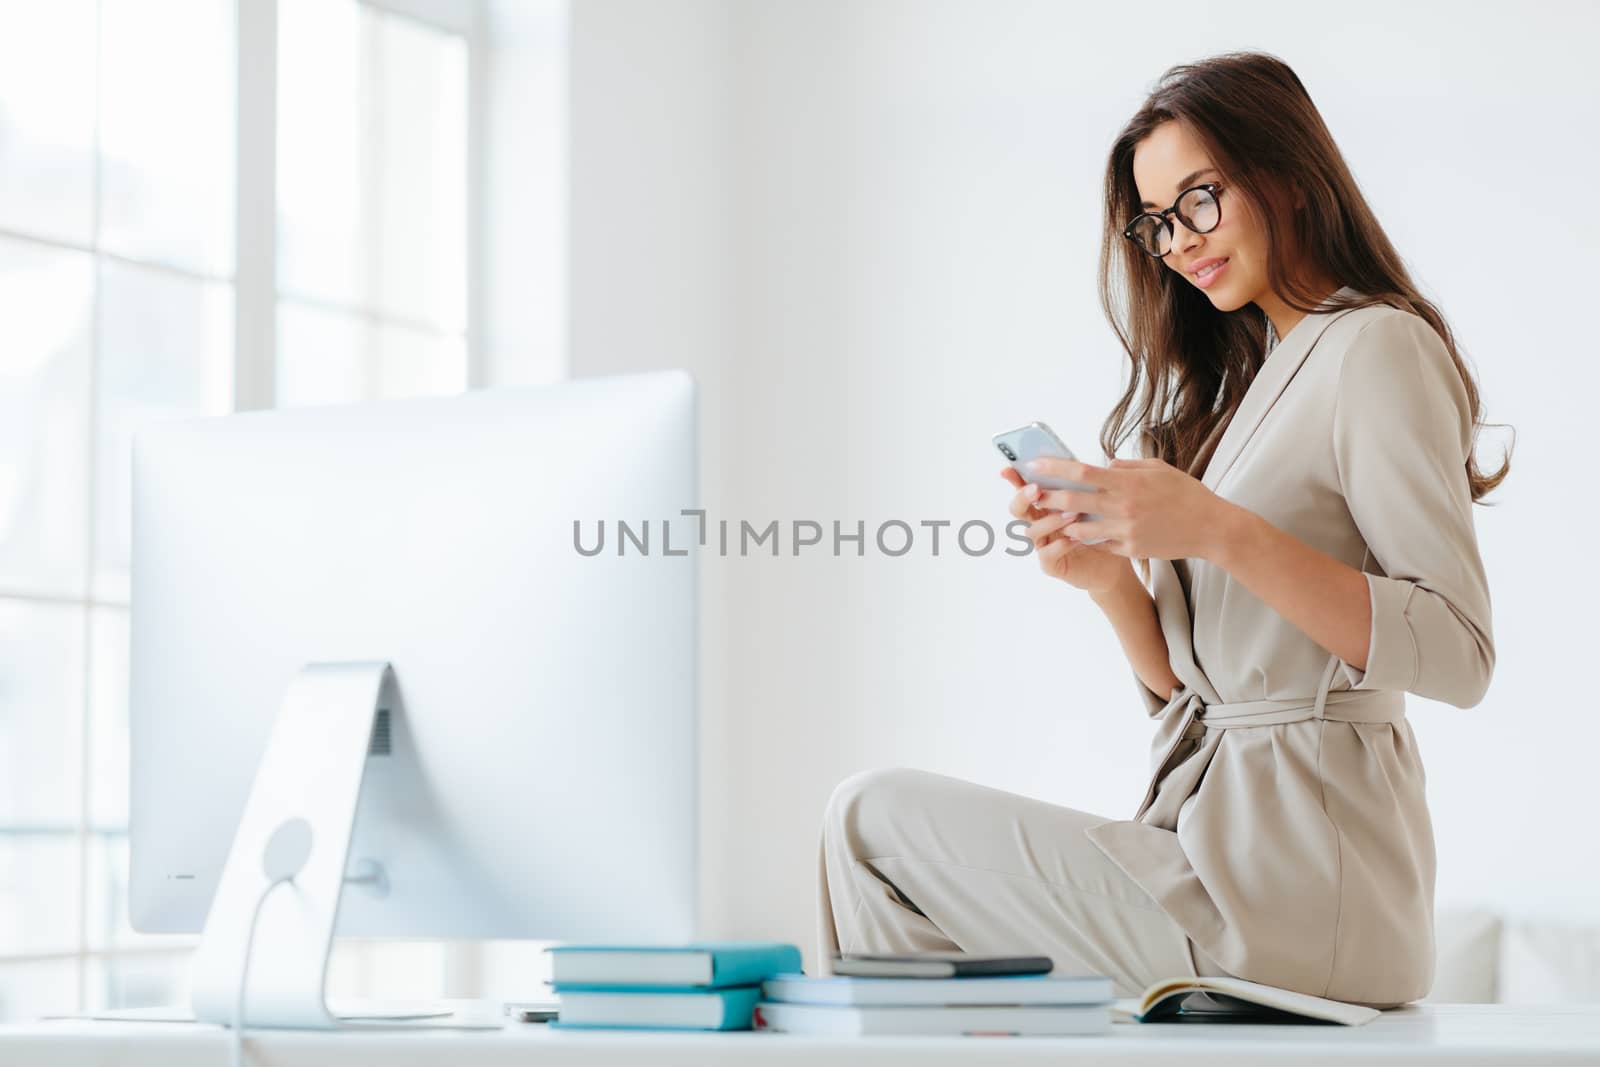 Horizontal shot of beautiful young woman in elegant clothes, has gentle smile, checks newsfeed via modern smartphone, has rest after hard work, poses in office interior at desktop, white walls